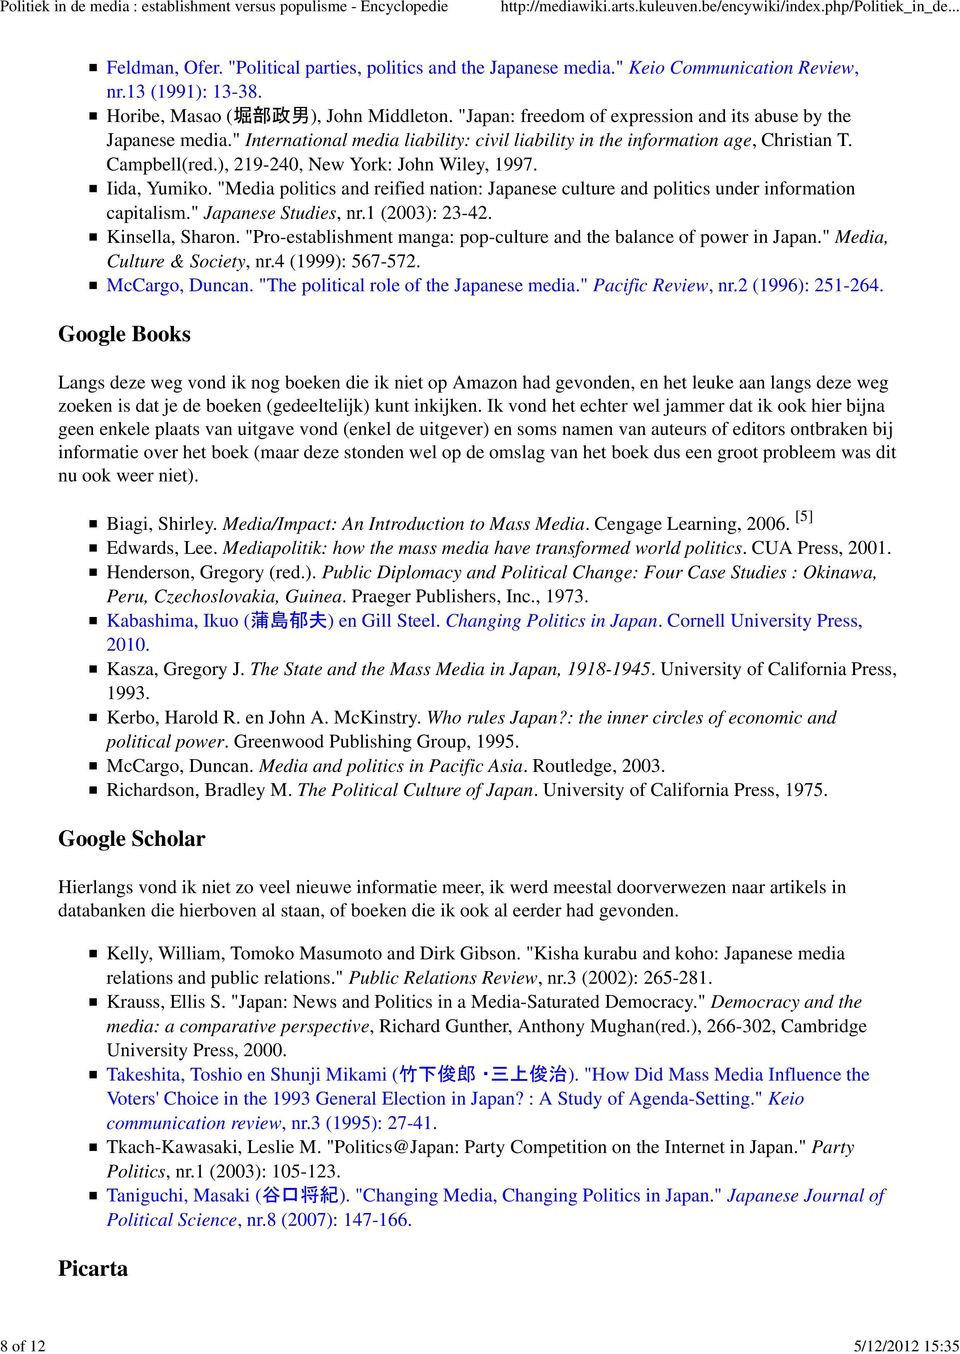 ), 219-240, New York: John Wiley, 1997. Iida, Yumiko. "Media politics and reified nation: Japanese culture and politics under information capitalism." Japanese Studies, nr.1 (2003): 23-42.